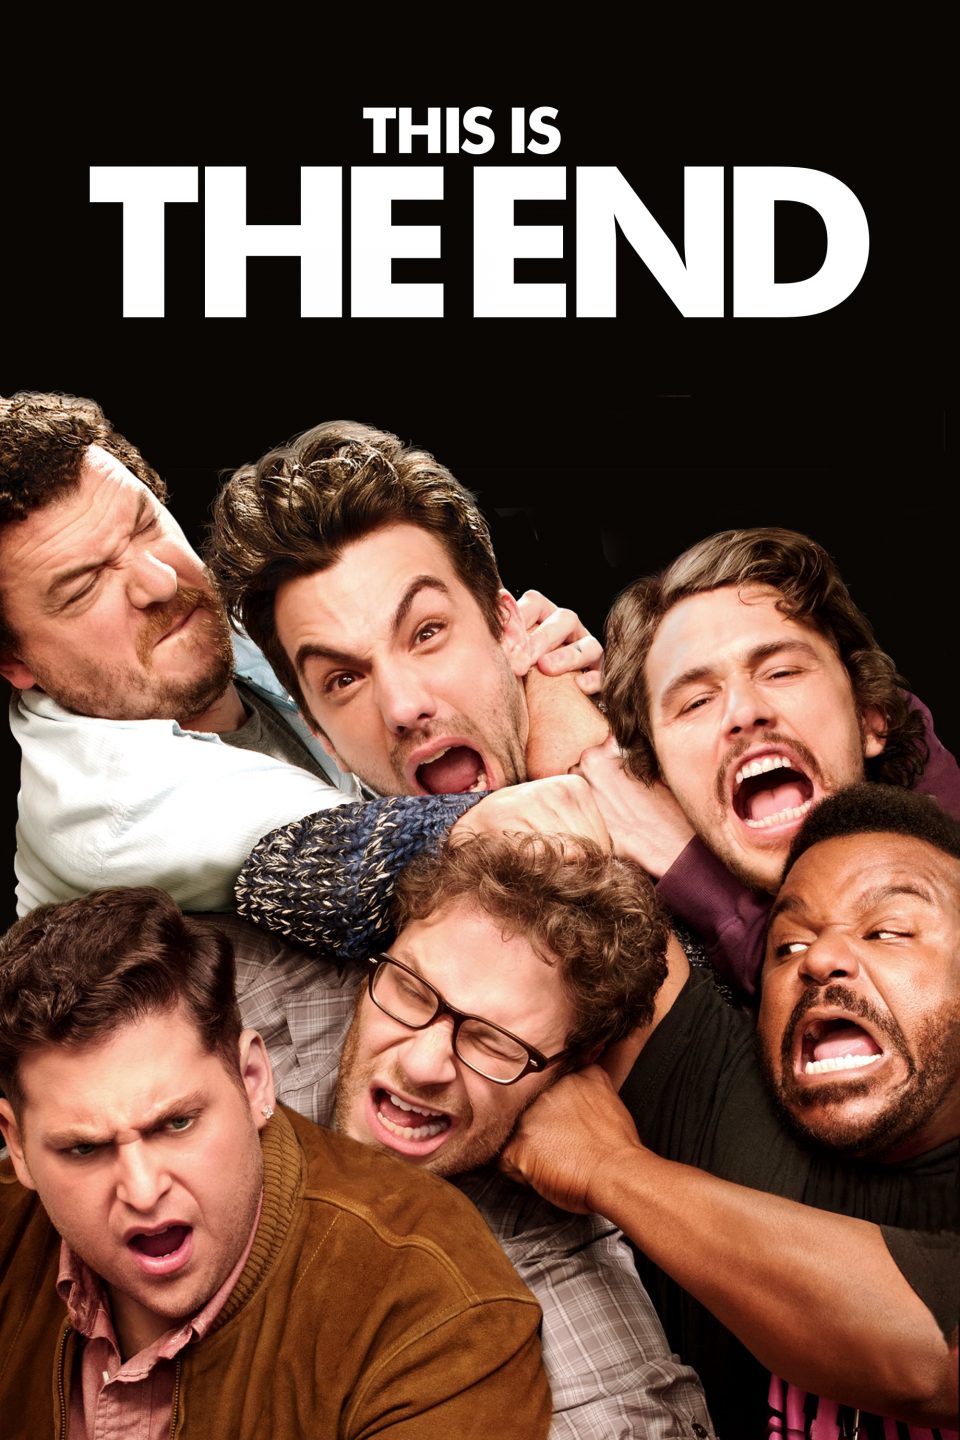 Poster for the movie "This Is the End"